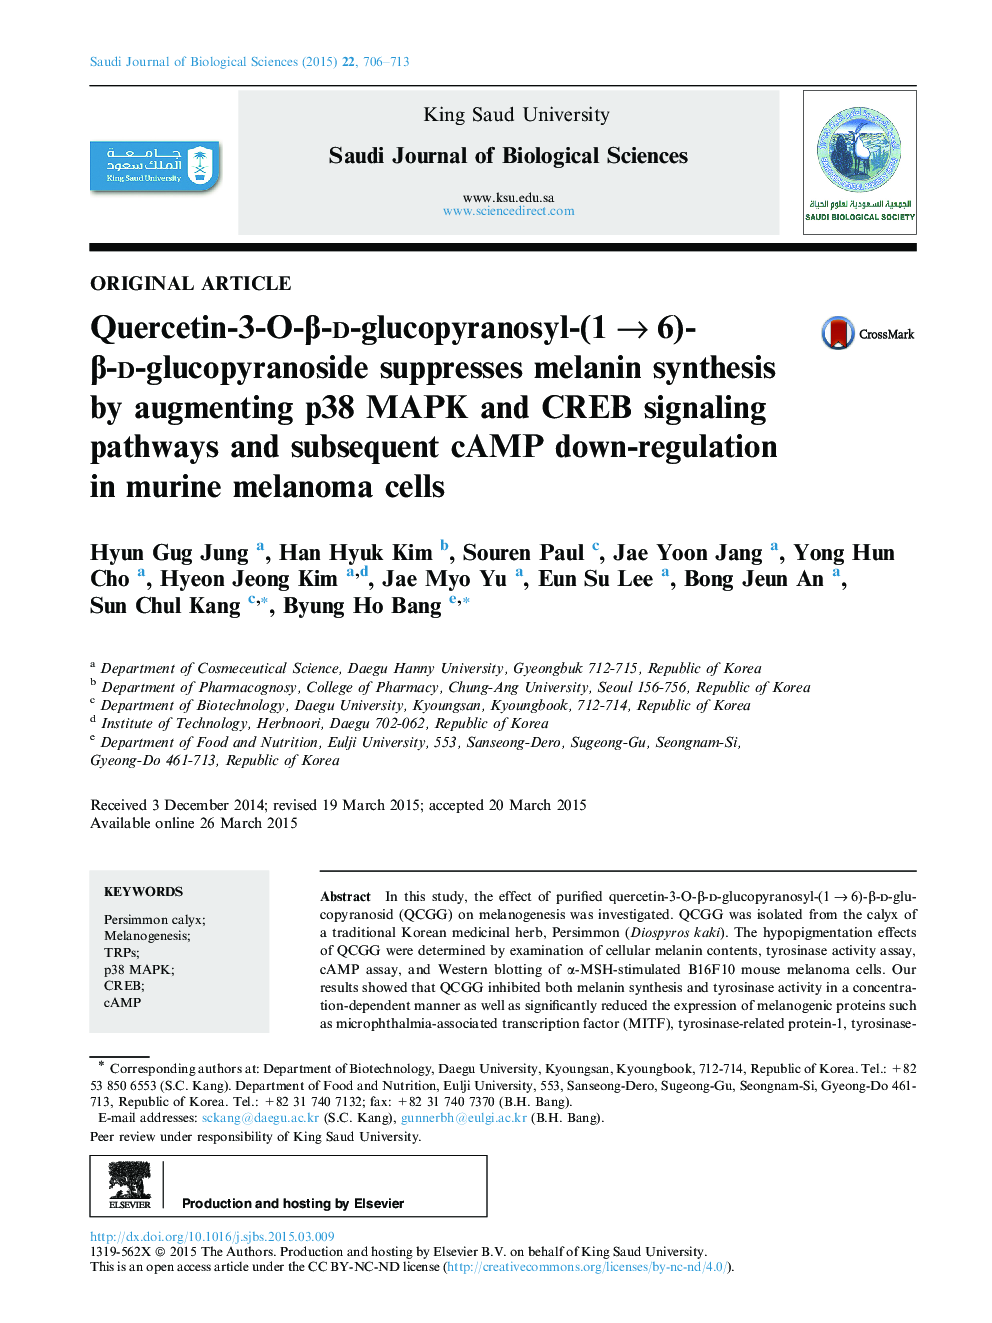 Quercetin-3-O-β-d-glucopyranosyl-(1 → 6)-β-d-glucopyranoside suppresses melanin synthesis by augmenting p38 MAPK and CREB signaling pathways and subsequent cAMP down-regulation in murine melanoma cells 